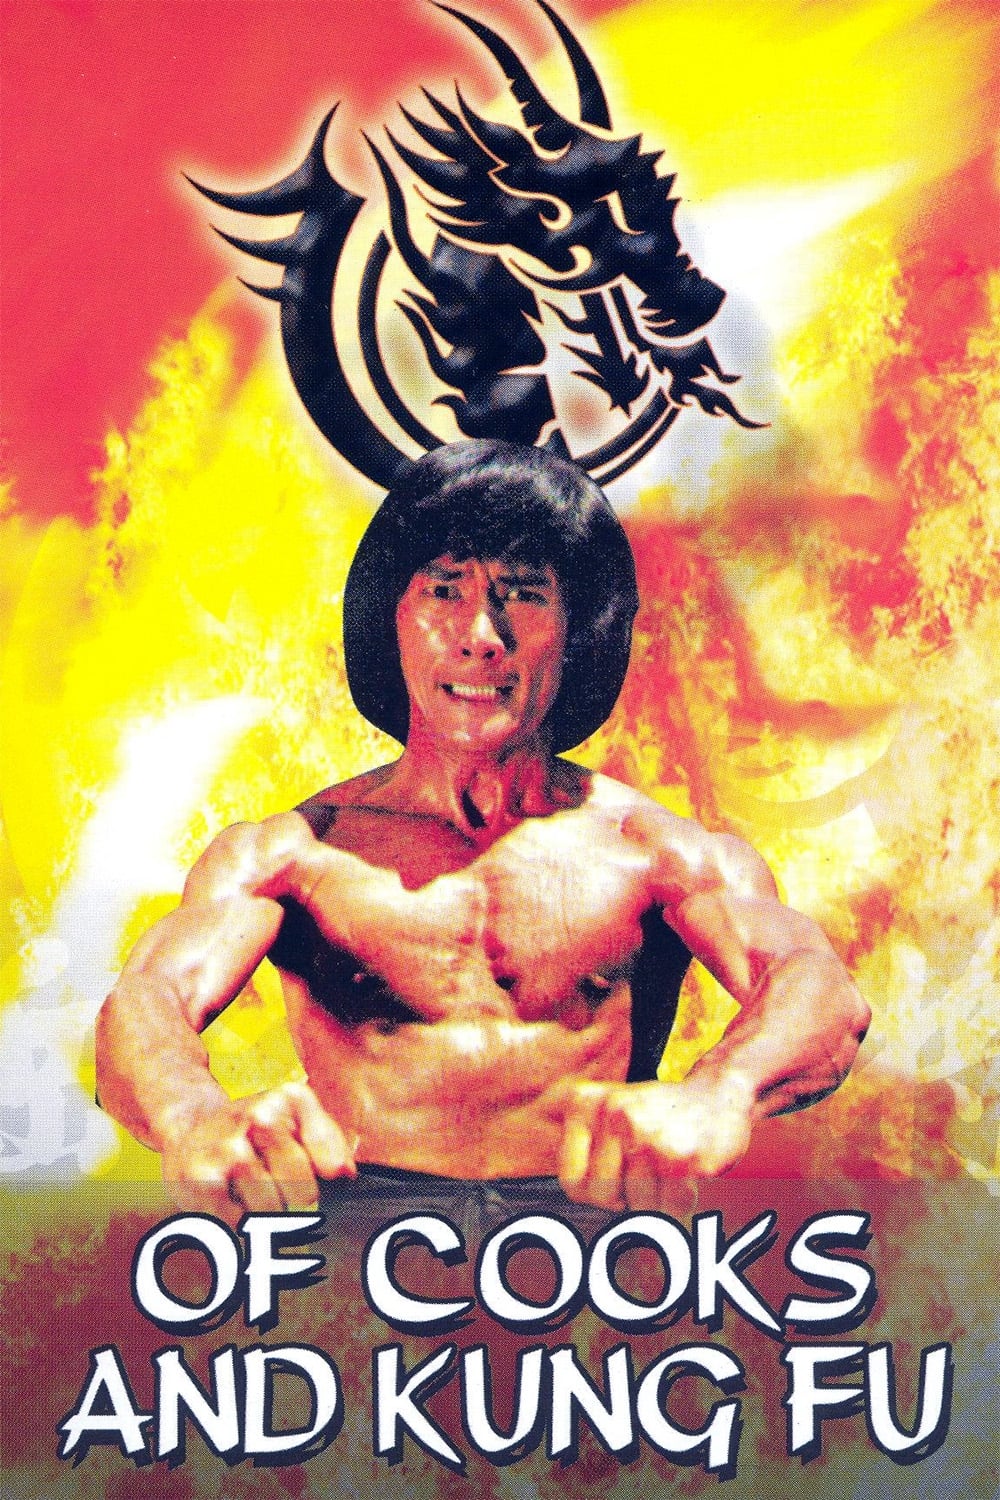 Of Cooks and Kung Fu (1979)